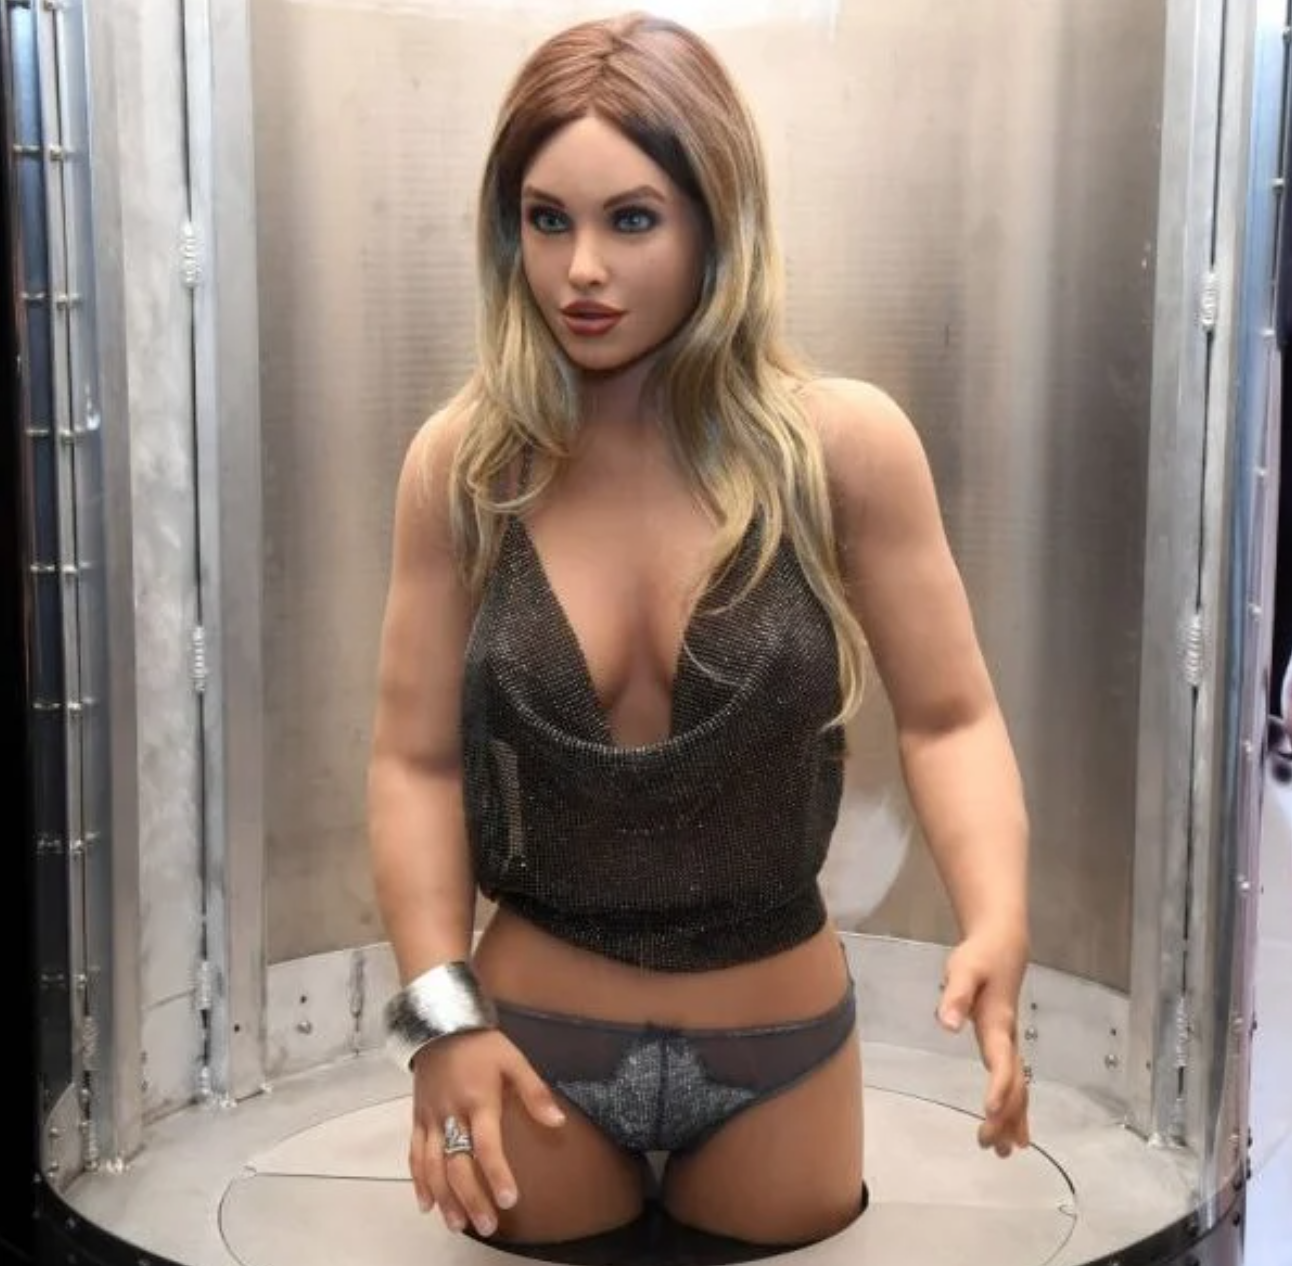 10 Years From Now: Anything You Can Do, Sex Dolls Will Soon Do Better